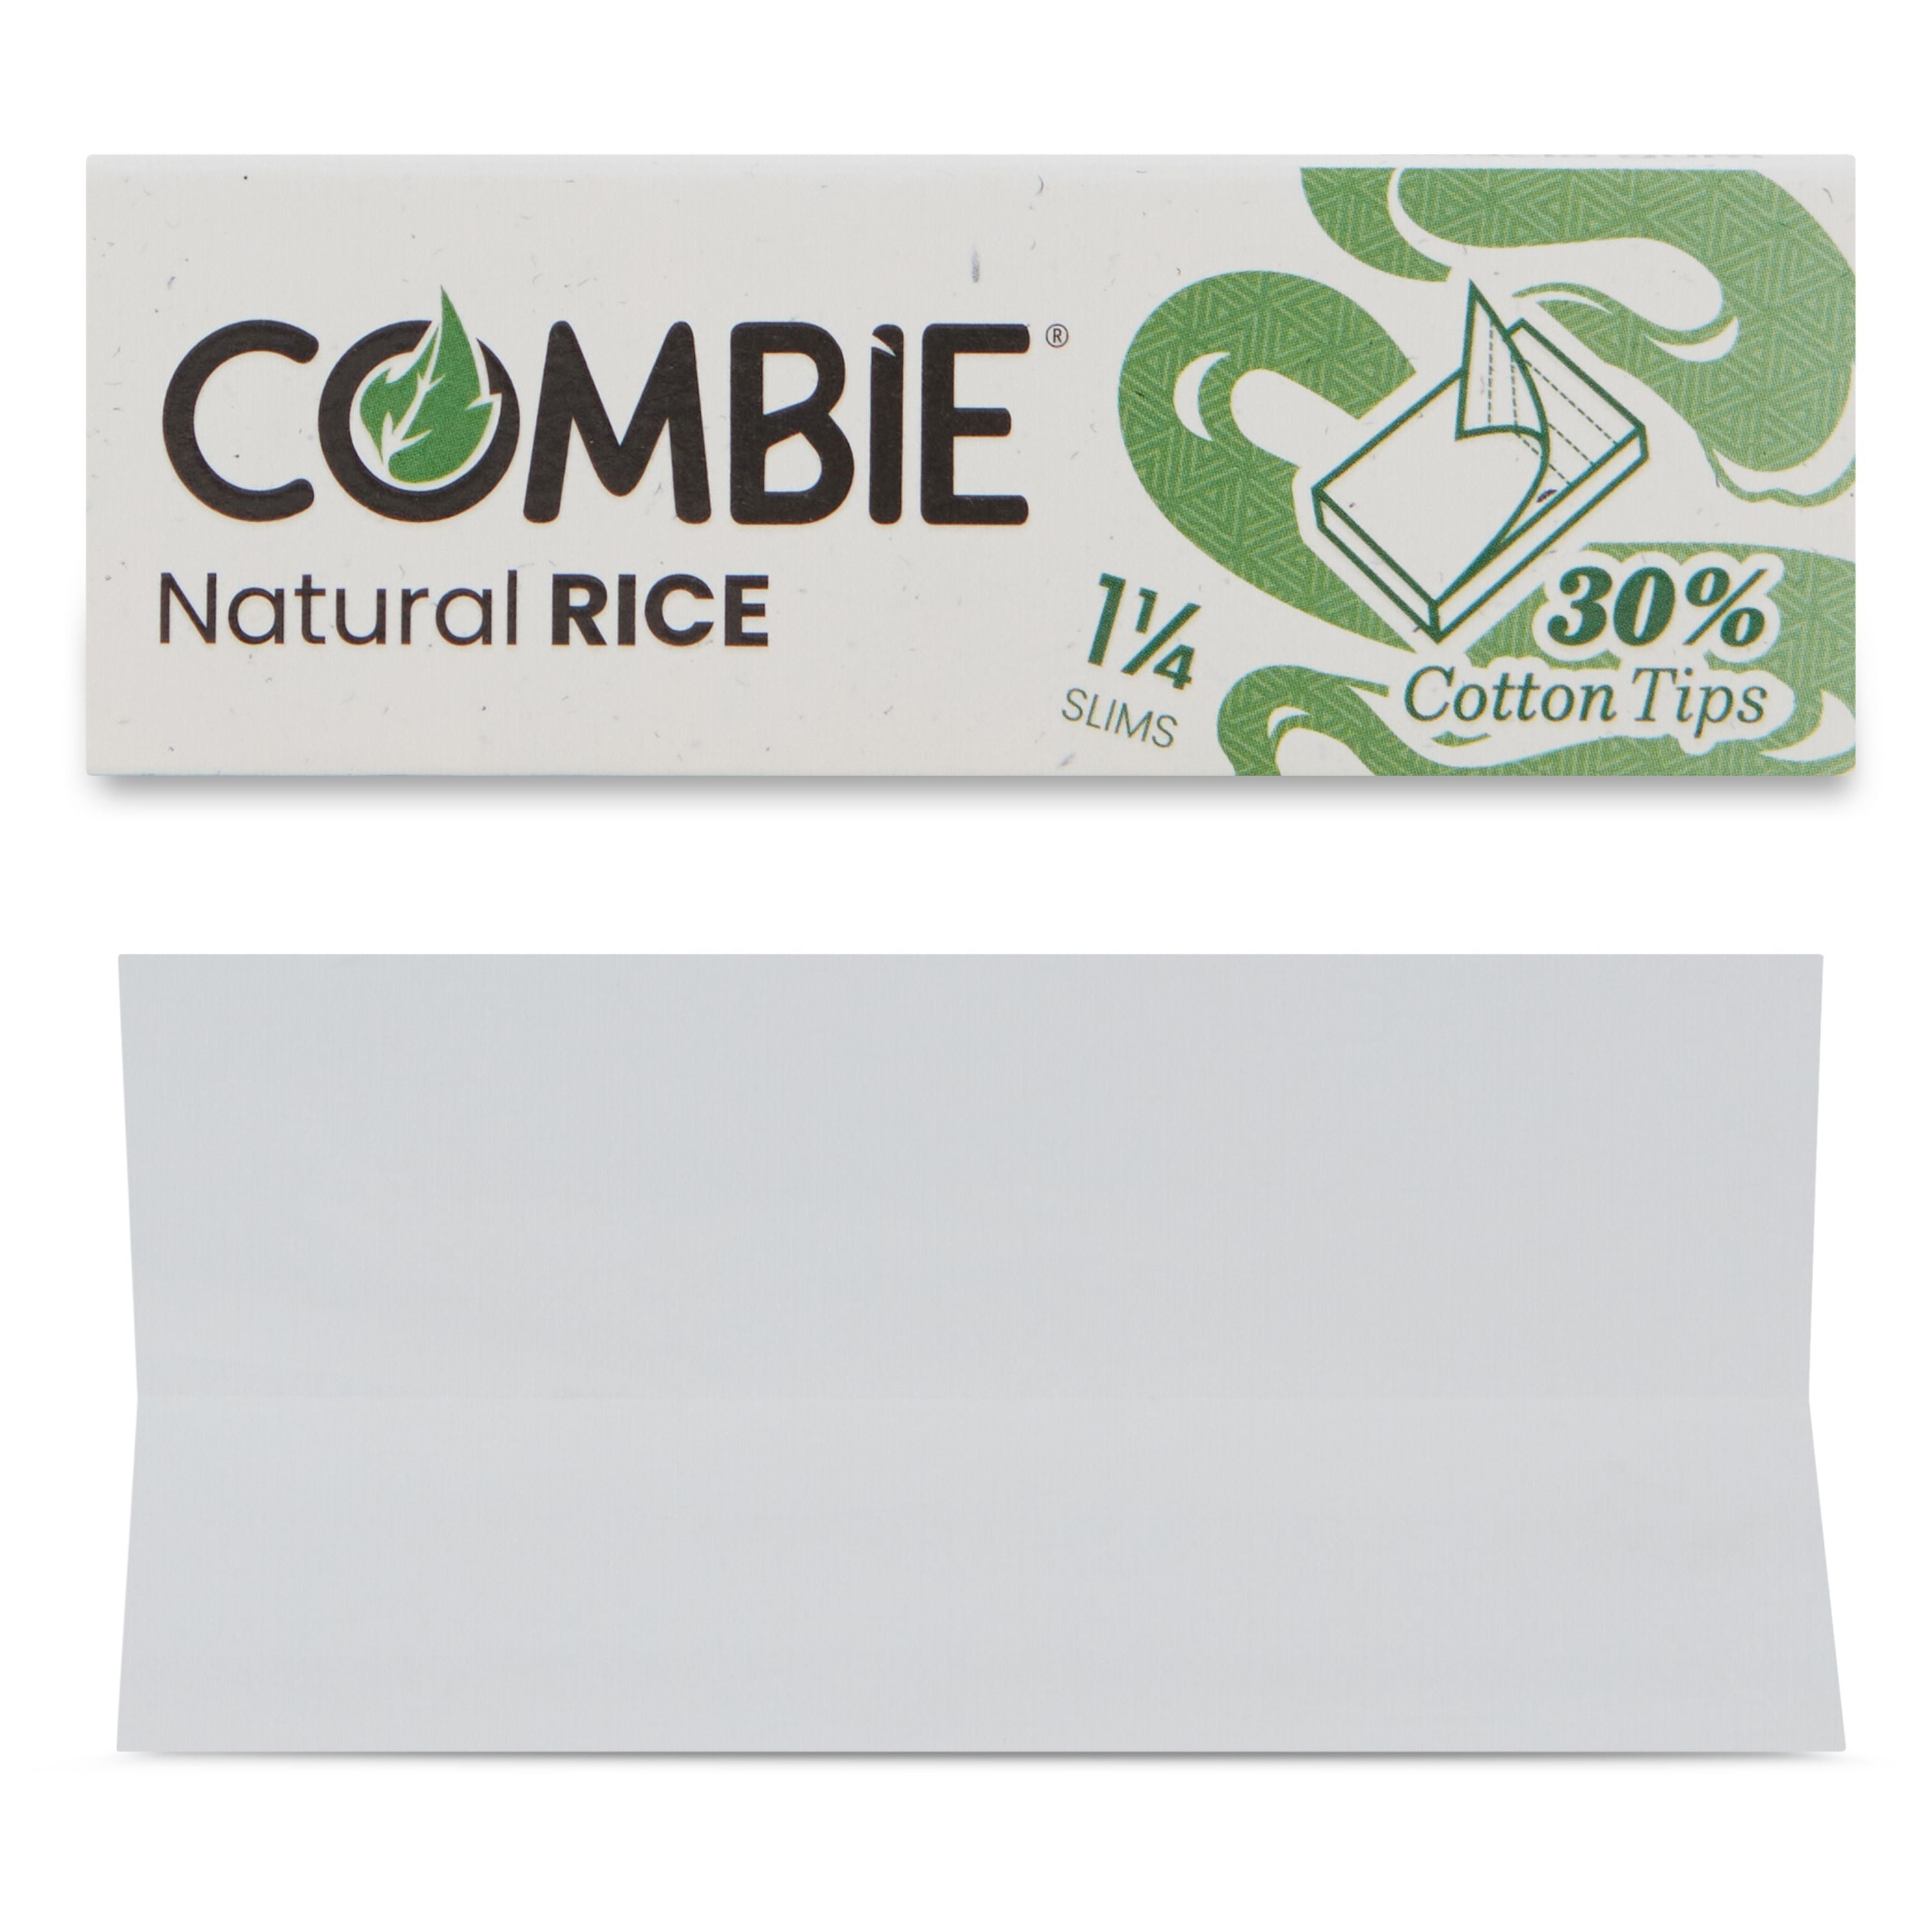 1-1/4 NATURAL RICE ROLLING PAPERS - 2 packs